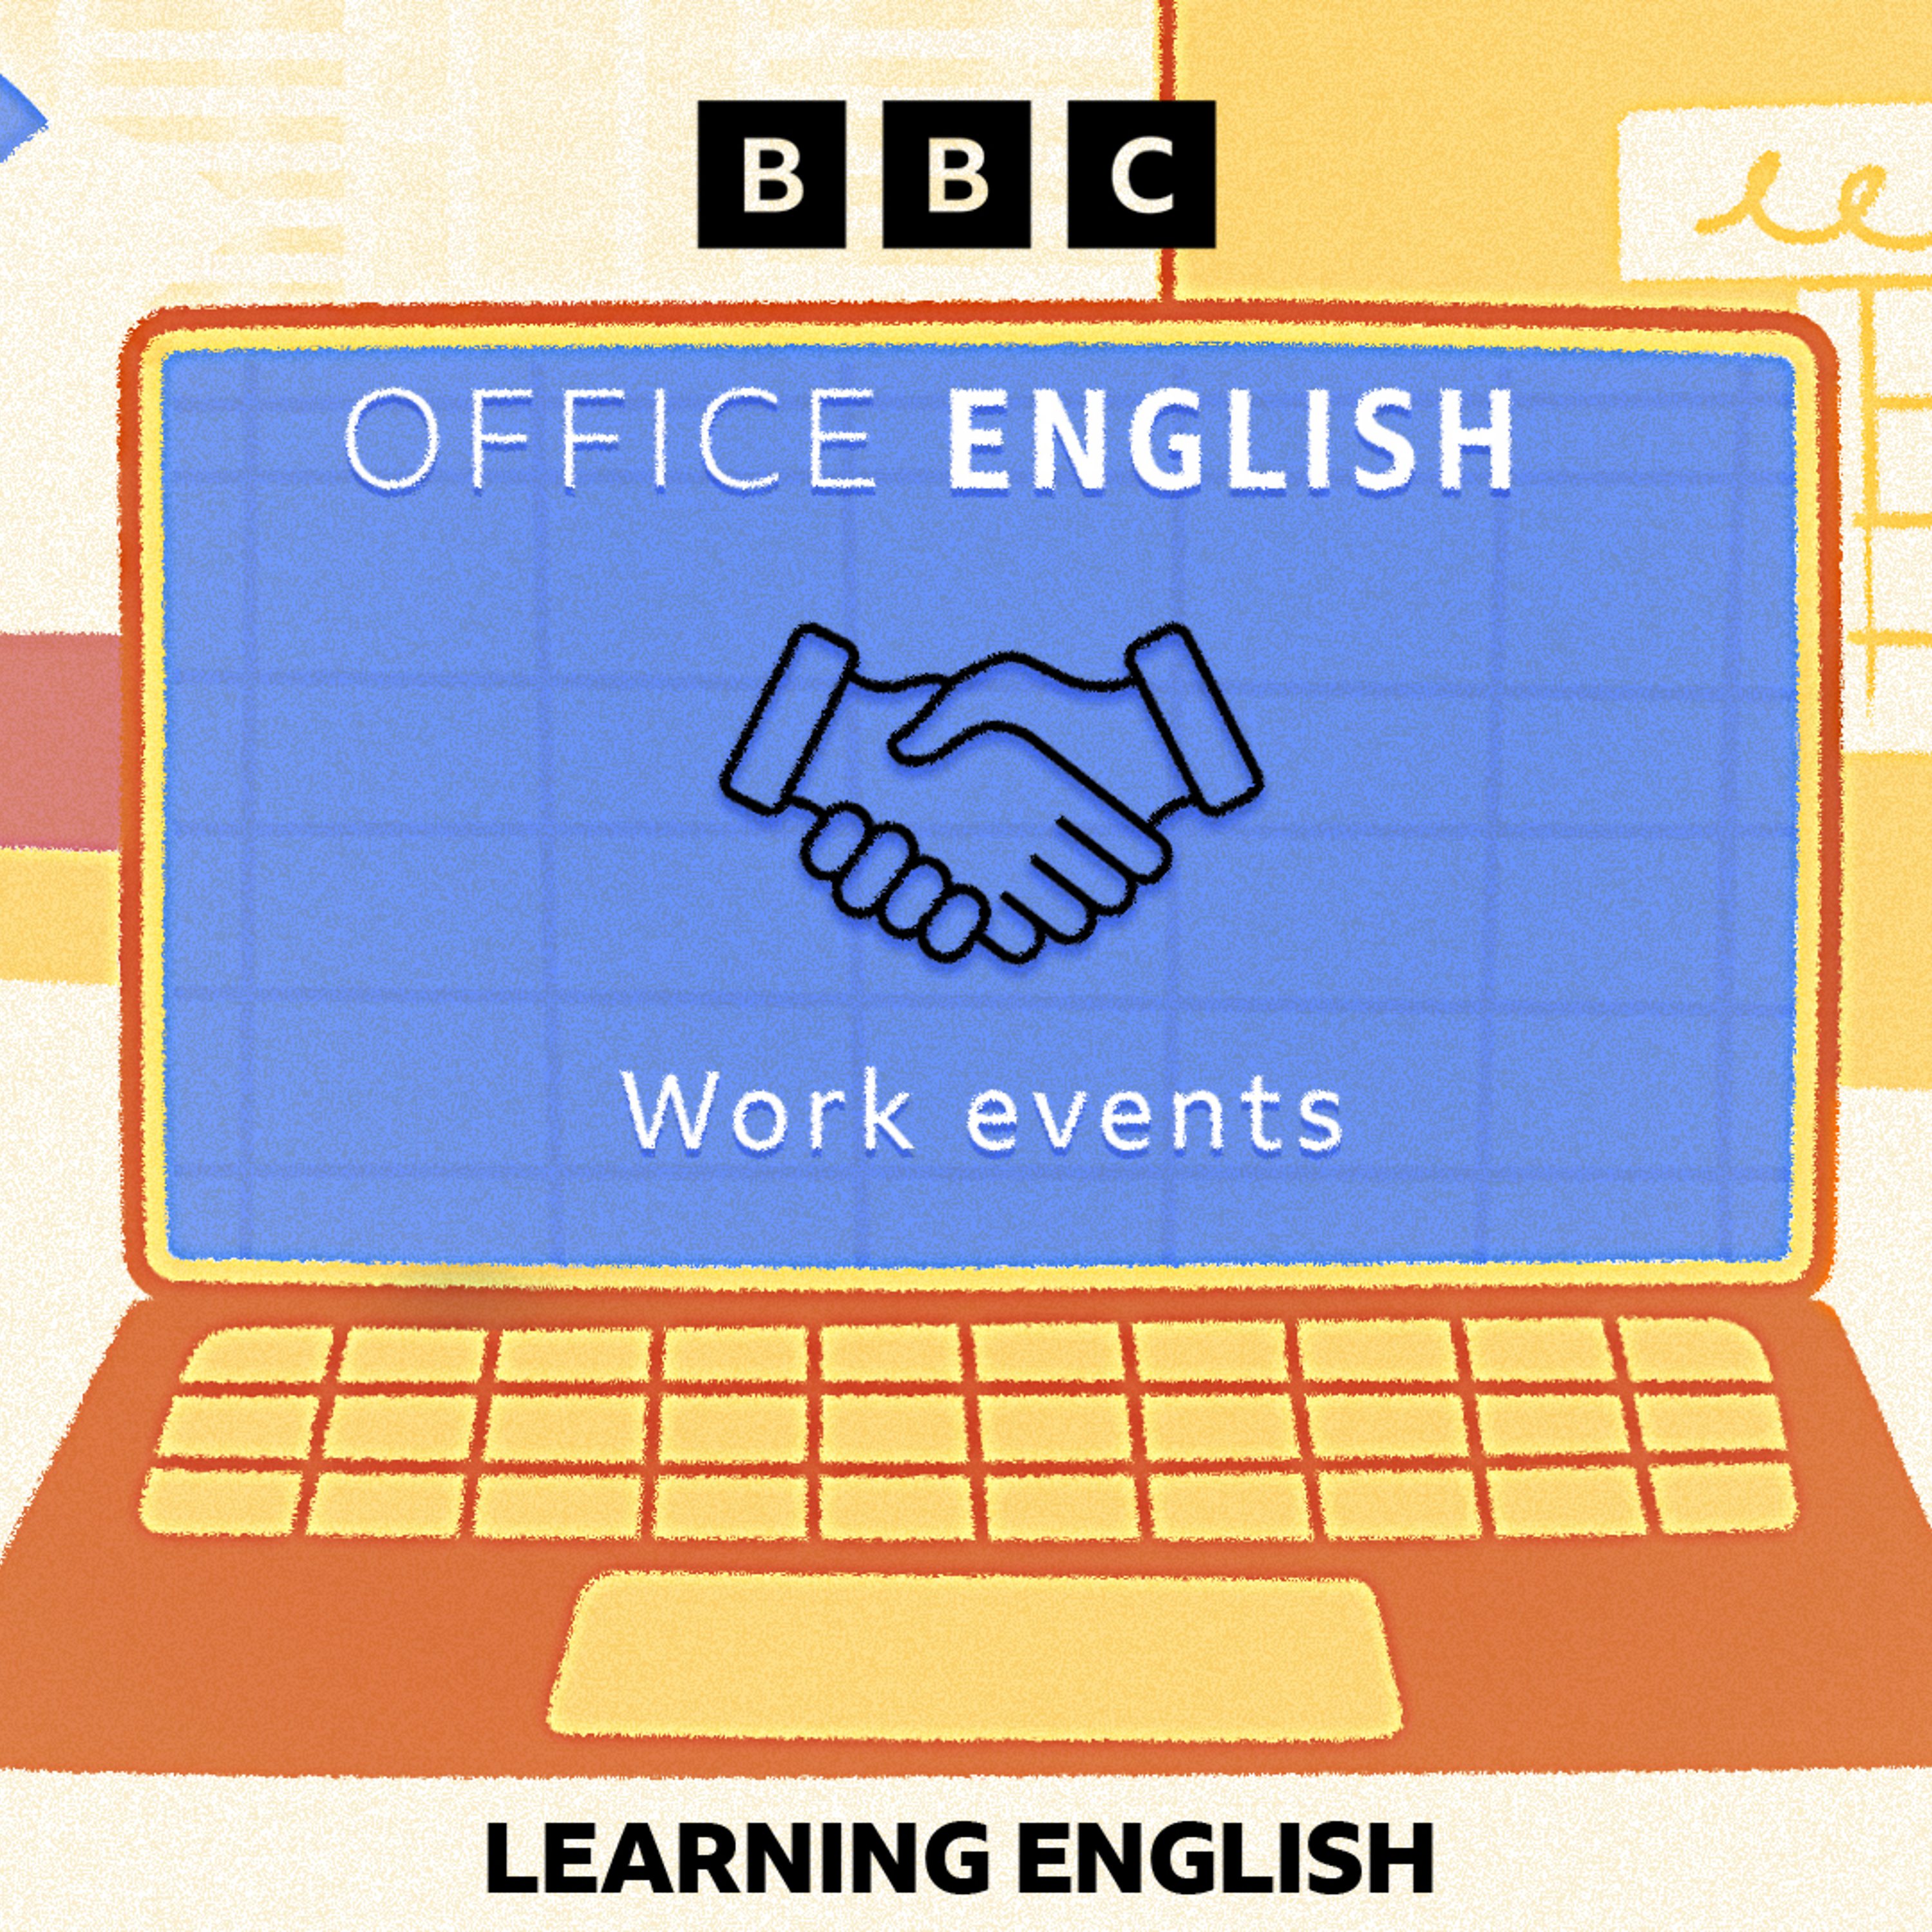 Office English: Work events